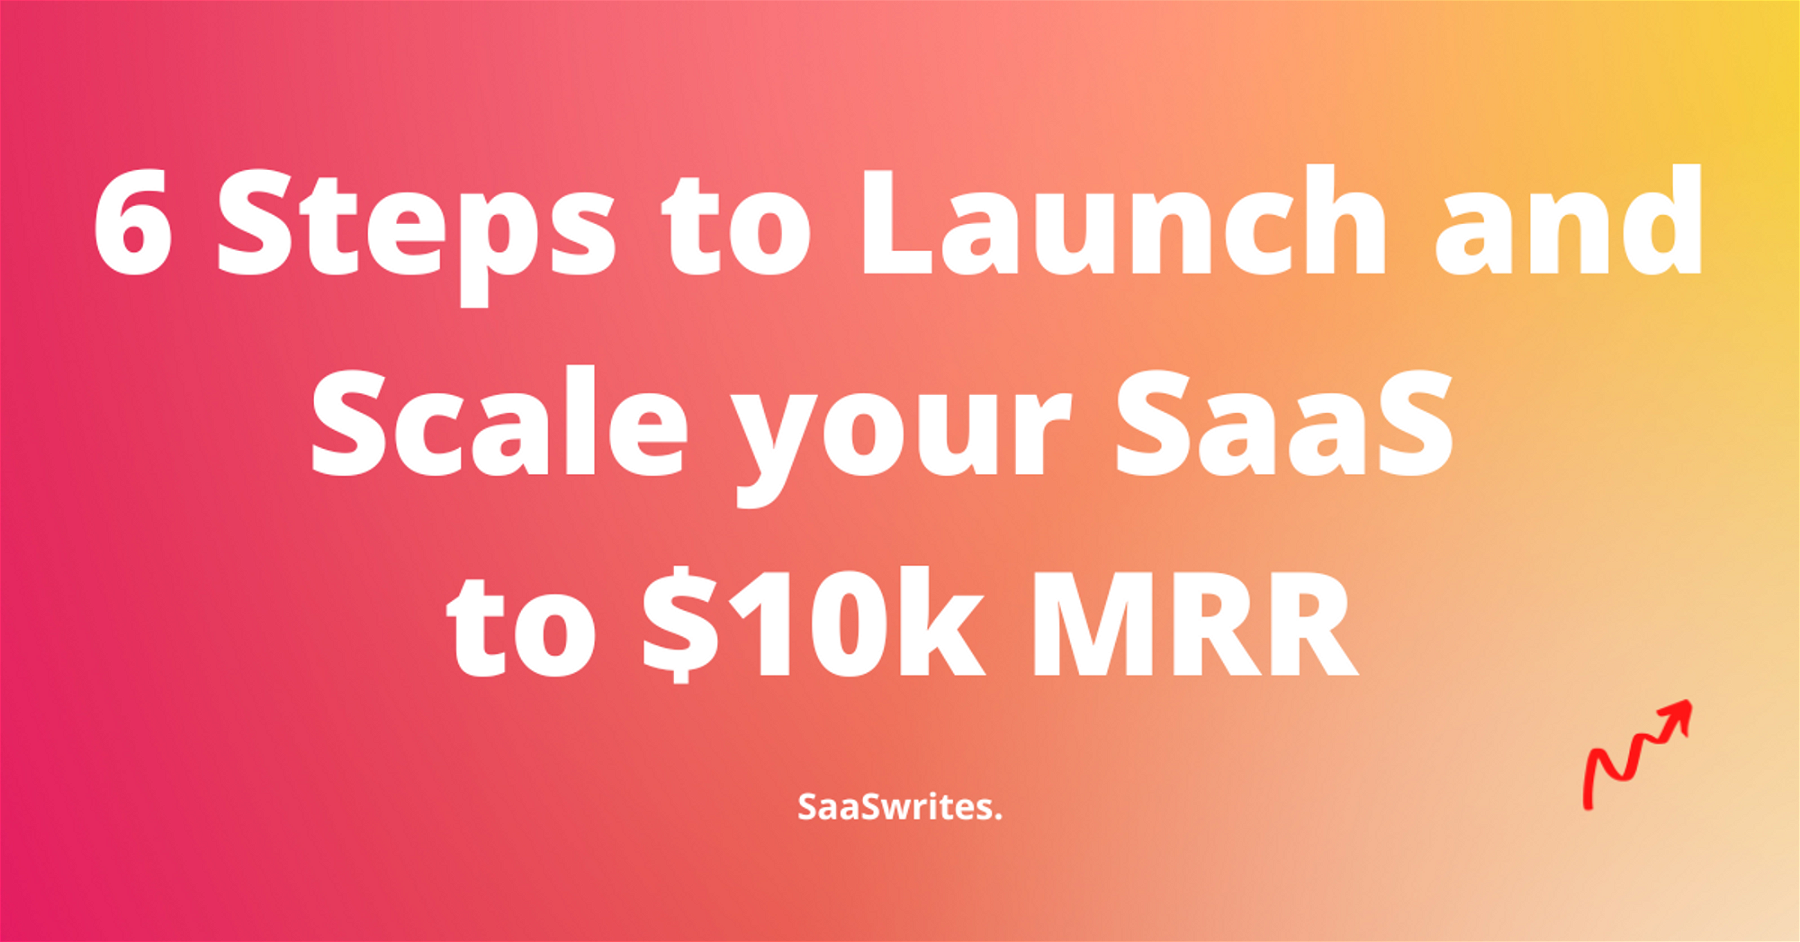 6 Steps to Launch and Grow your SaaS to $10K MRR in 2023